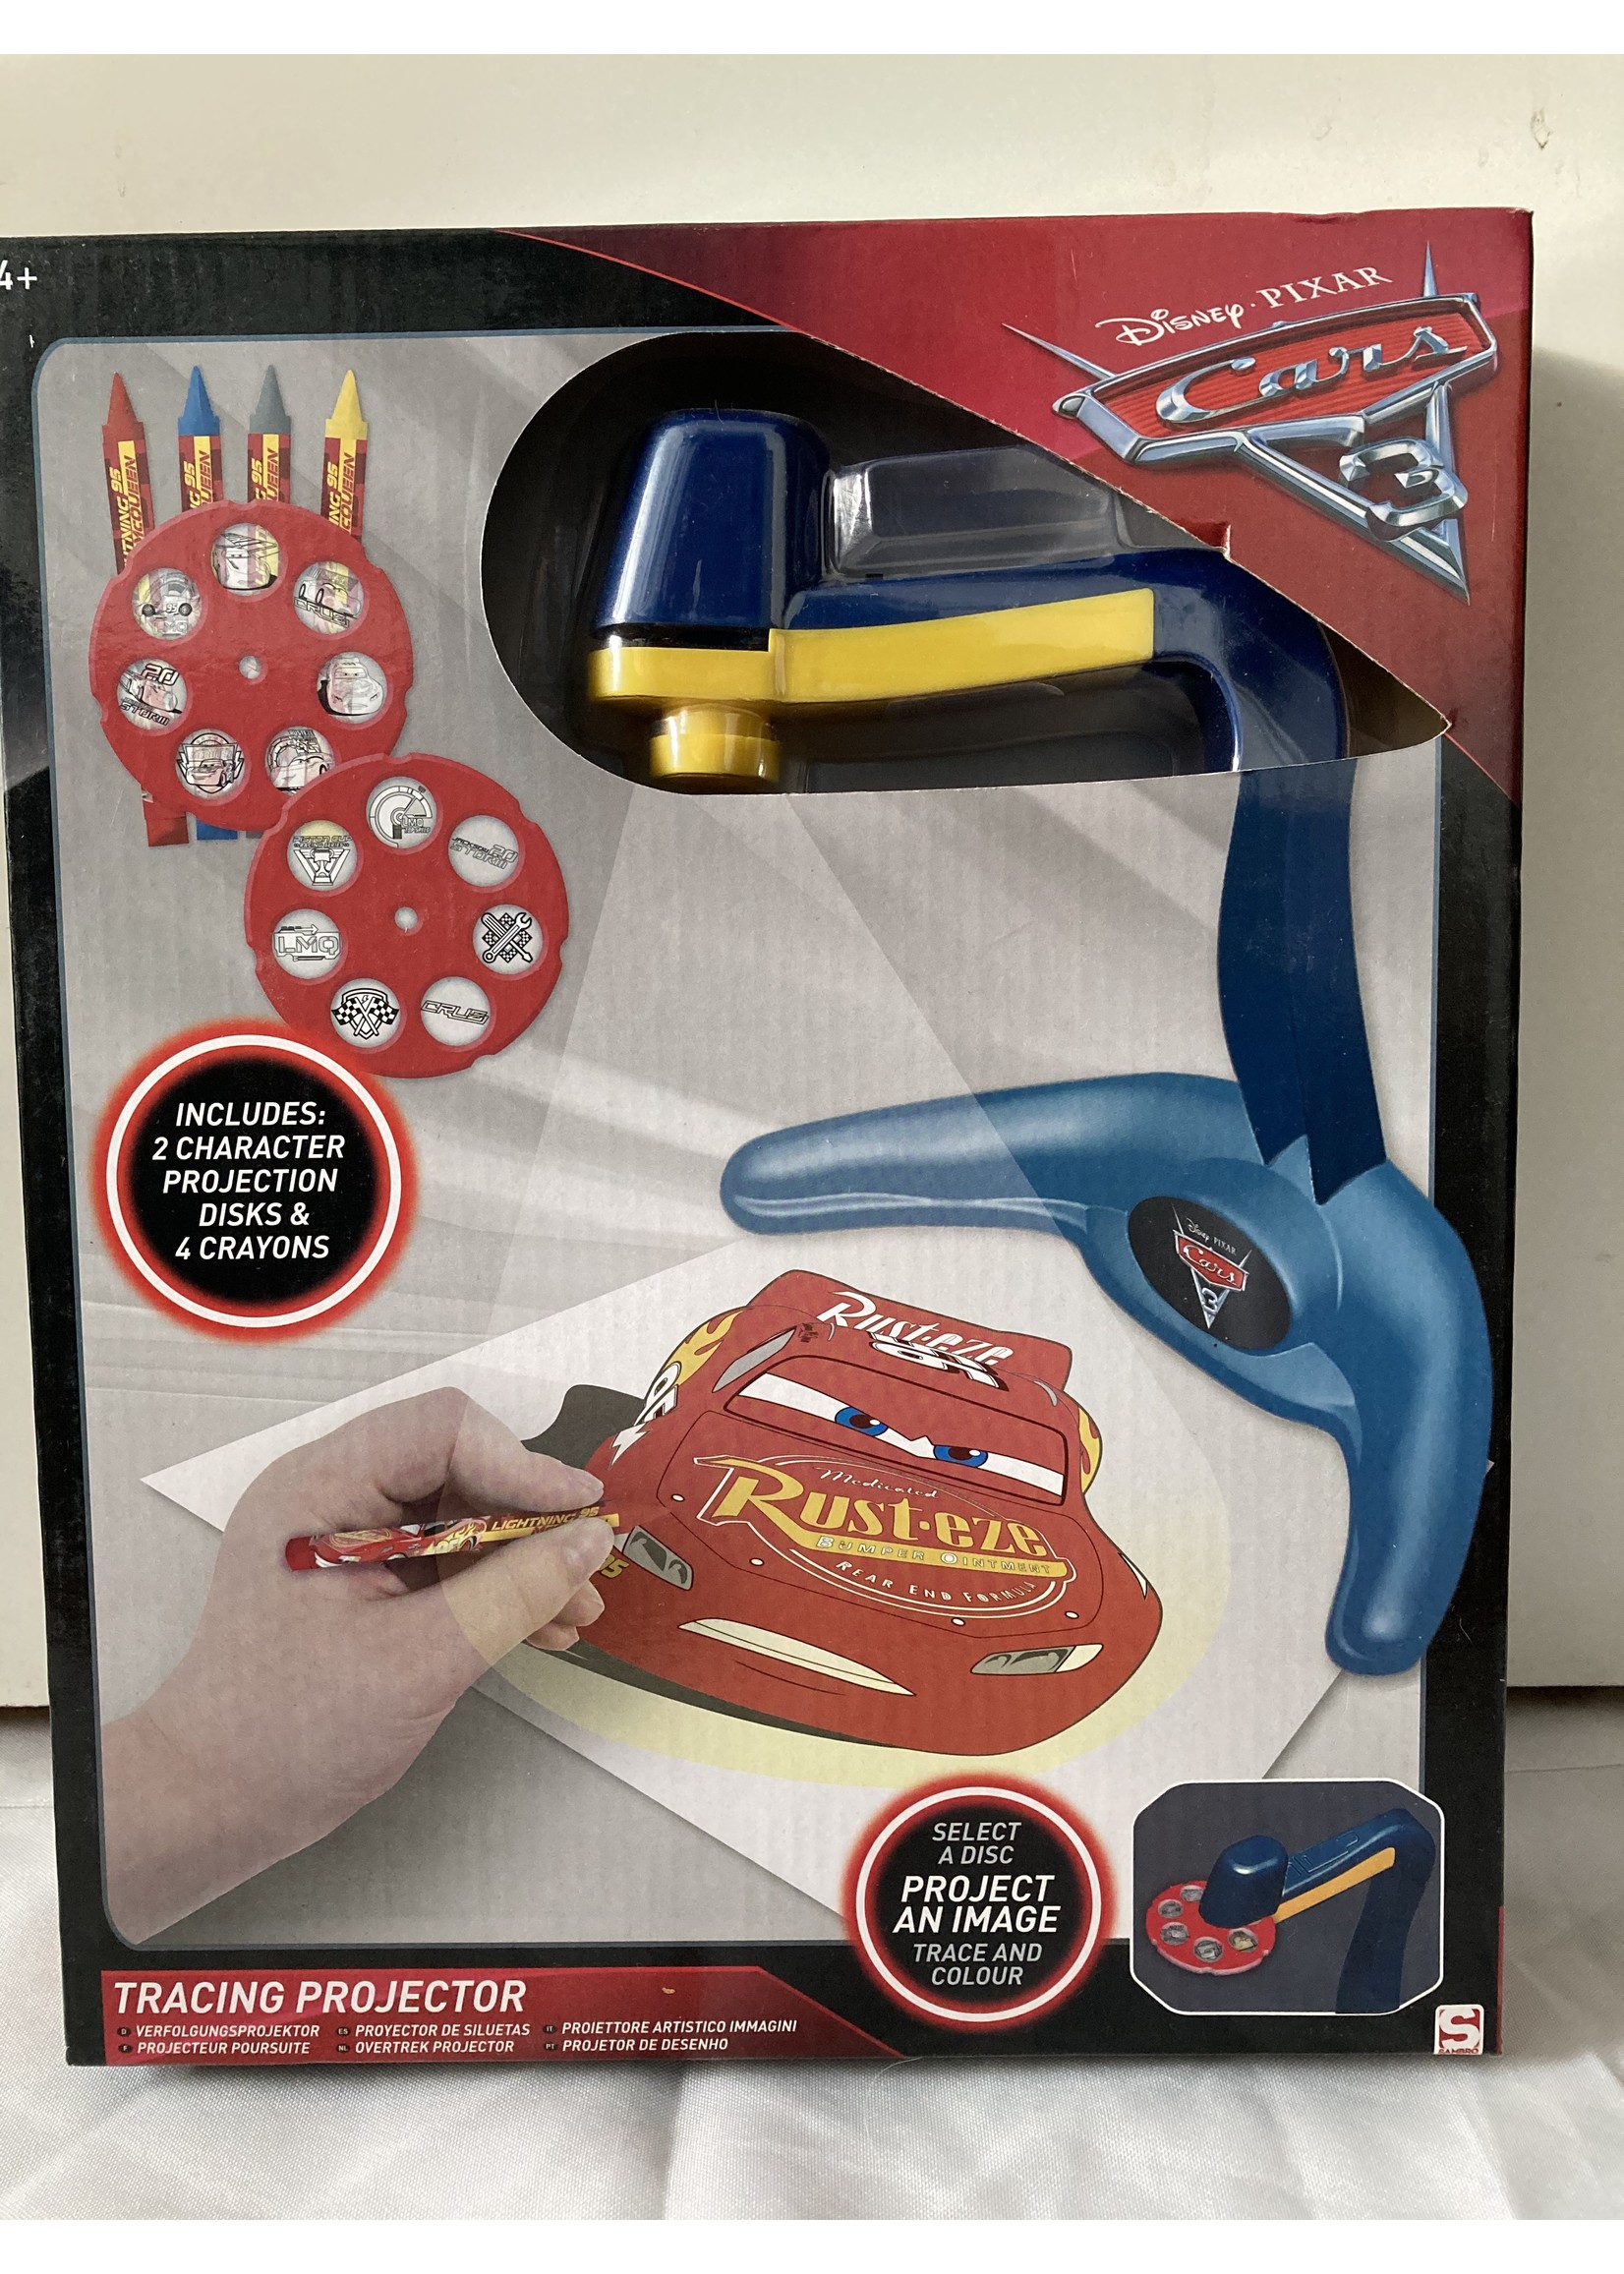 Disney Cars cover projector from Disney blue